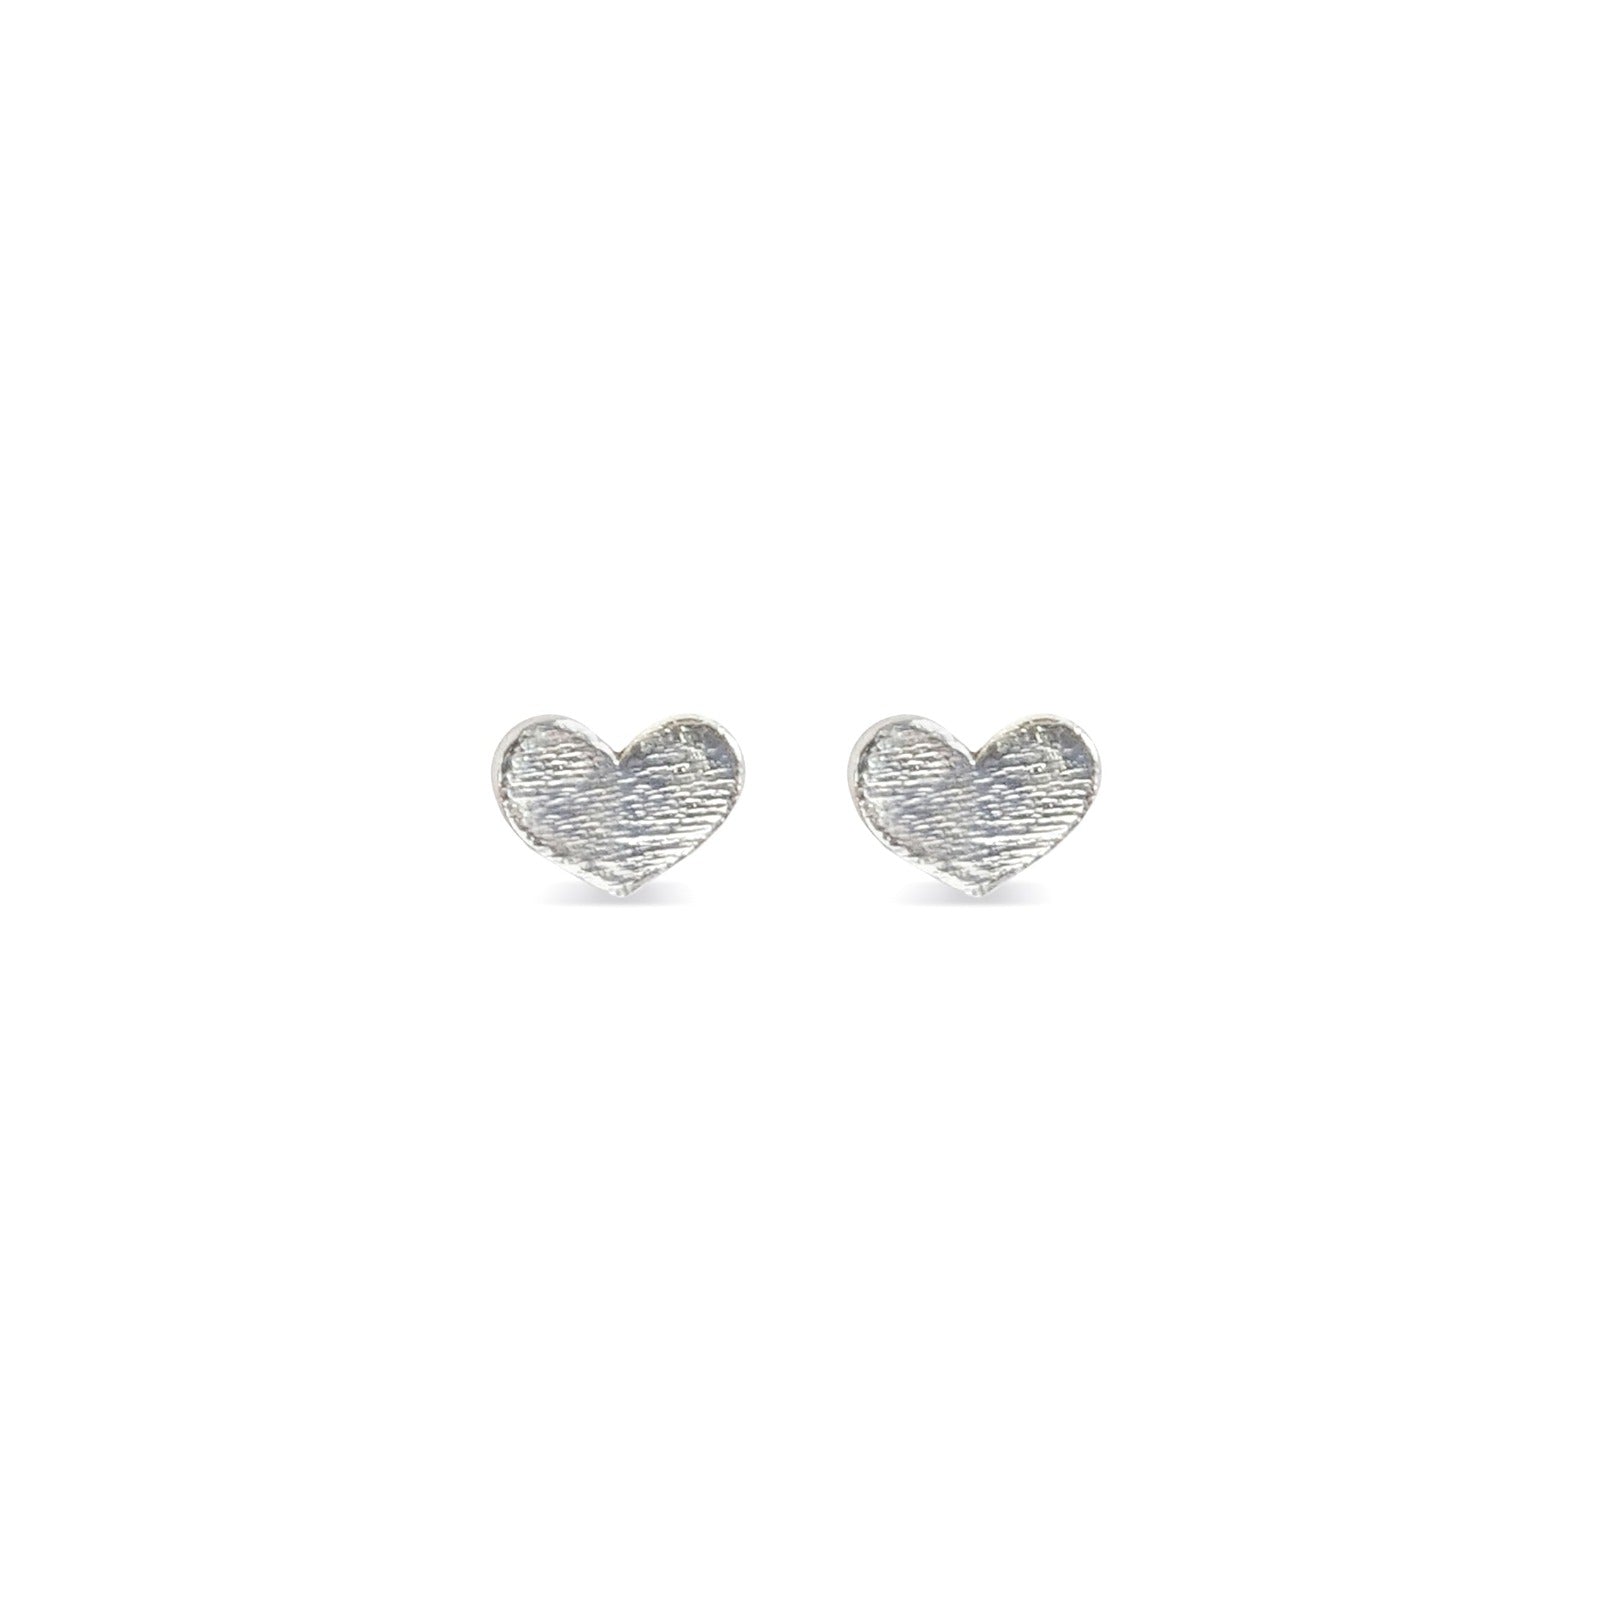 Tiny silver heart stud earrings with texture